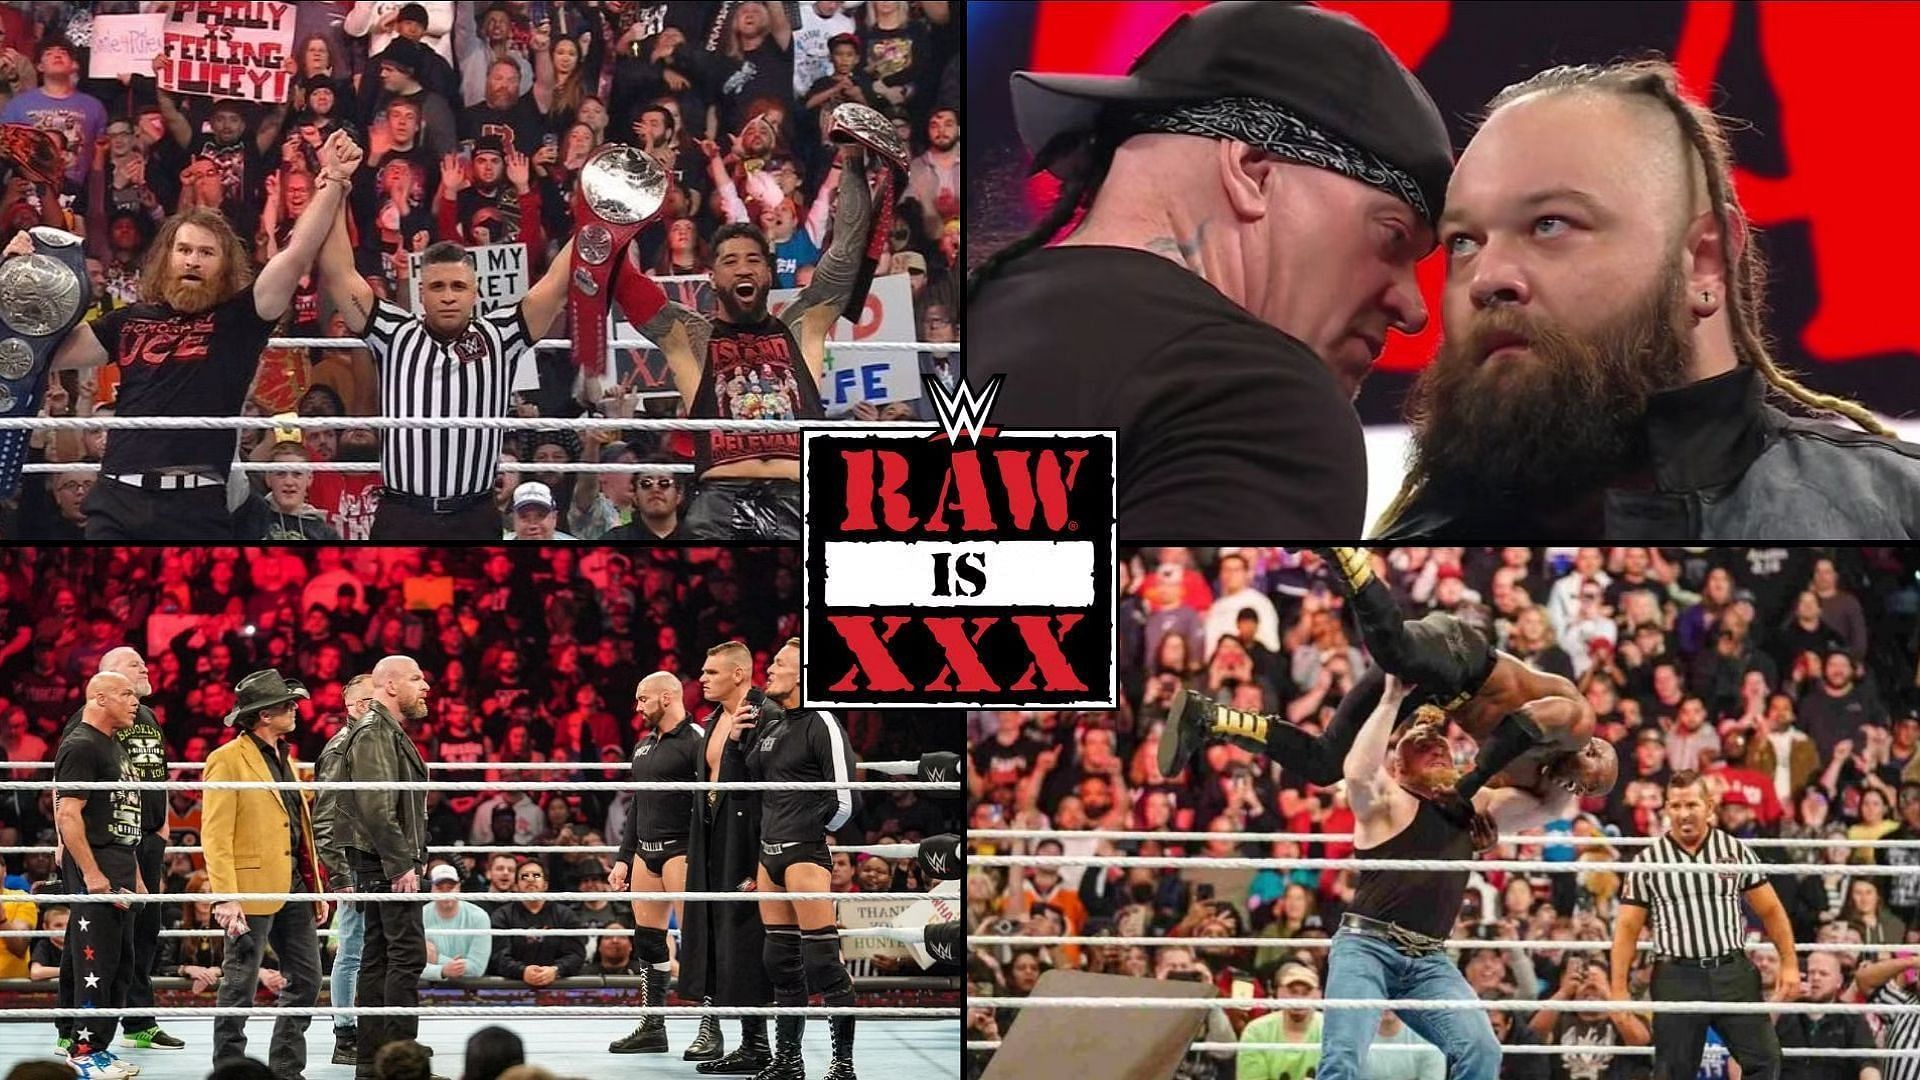 RAW is XXX showed a stark contrast between Triple H and Vince McMahon&#039;s handling of legends